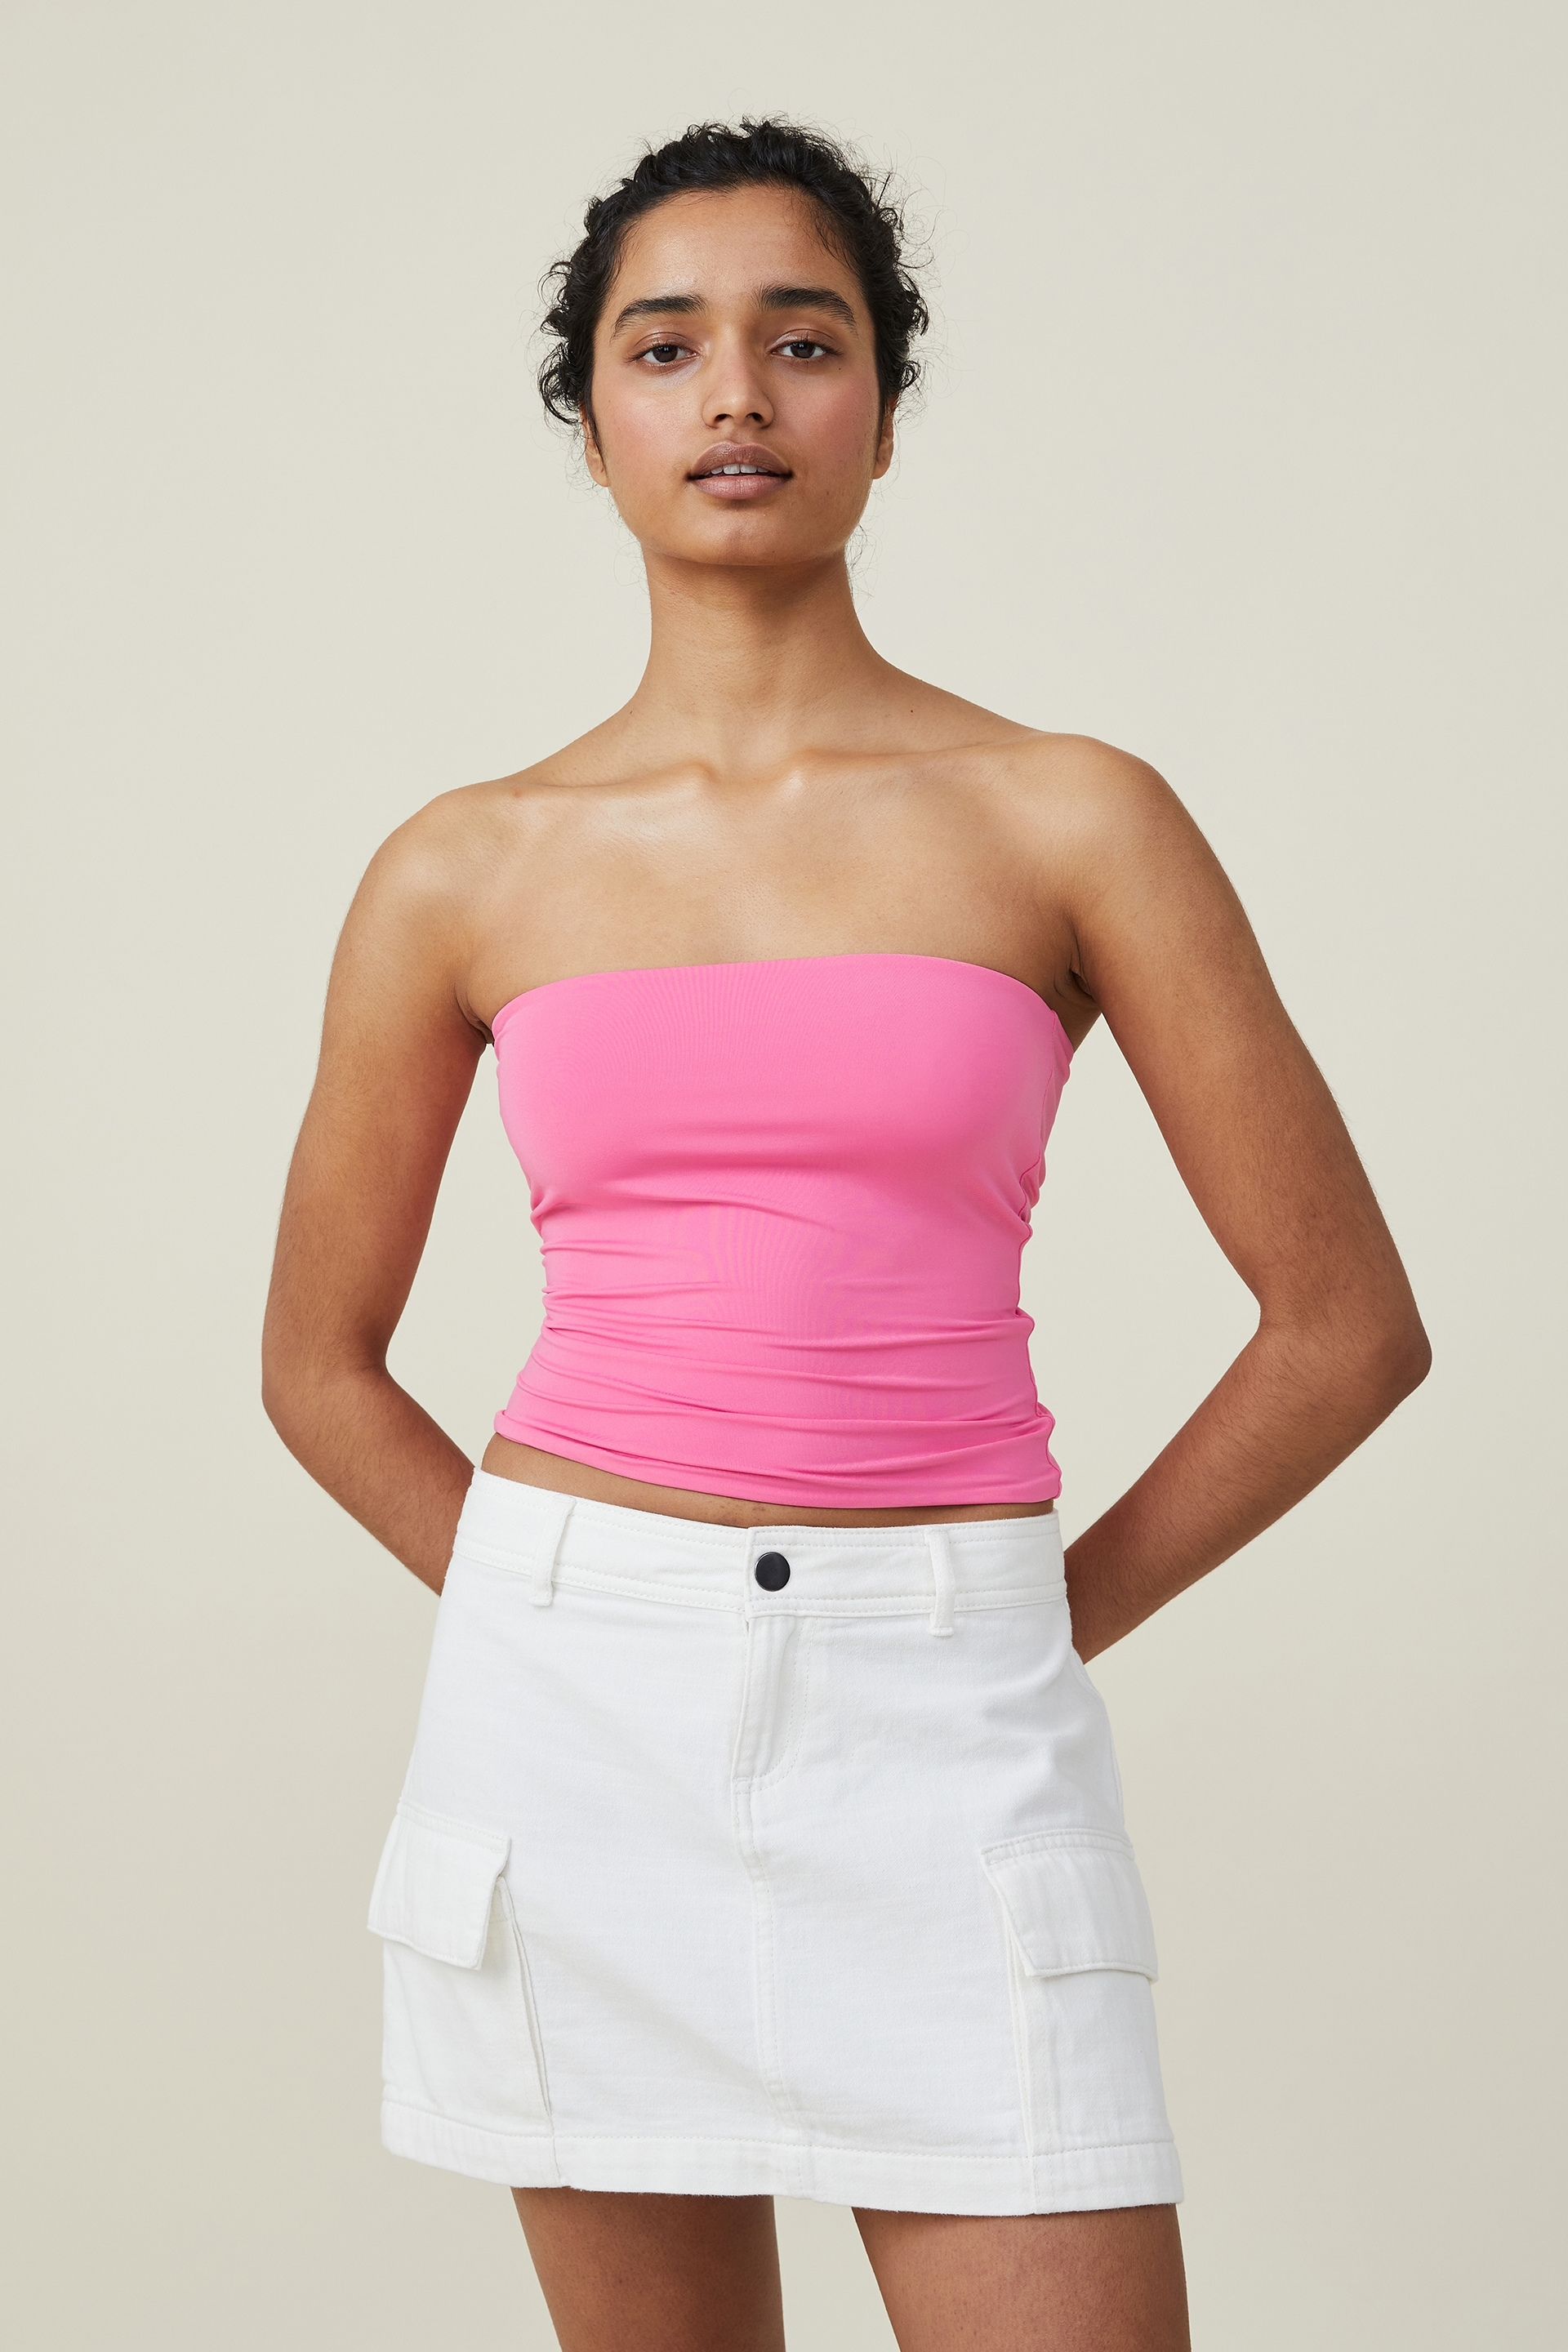 Cotton On Women - Sculpted Tube Top - Fun pink